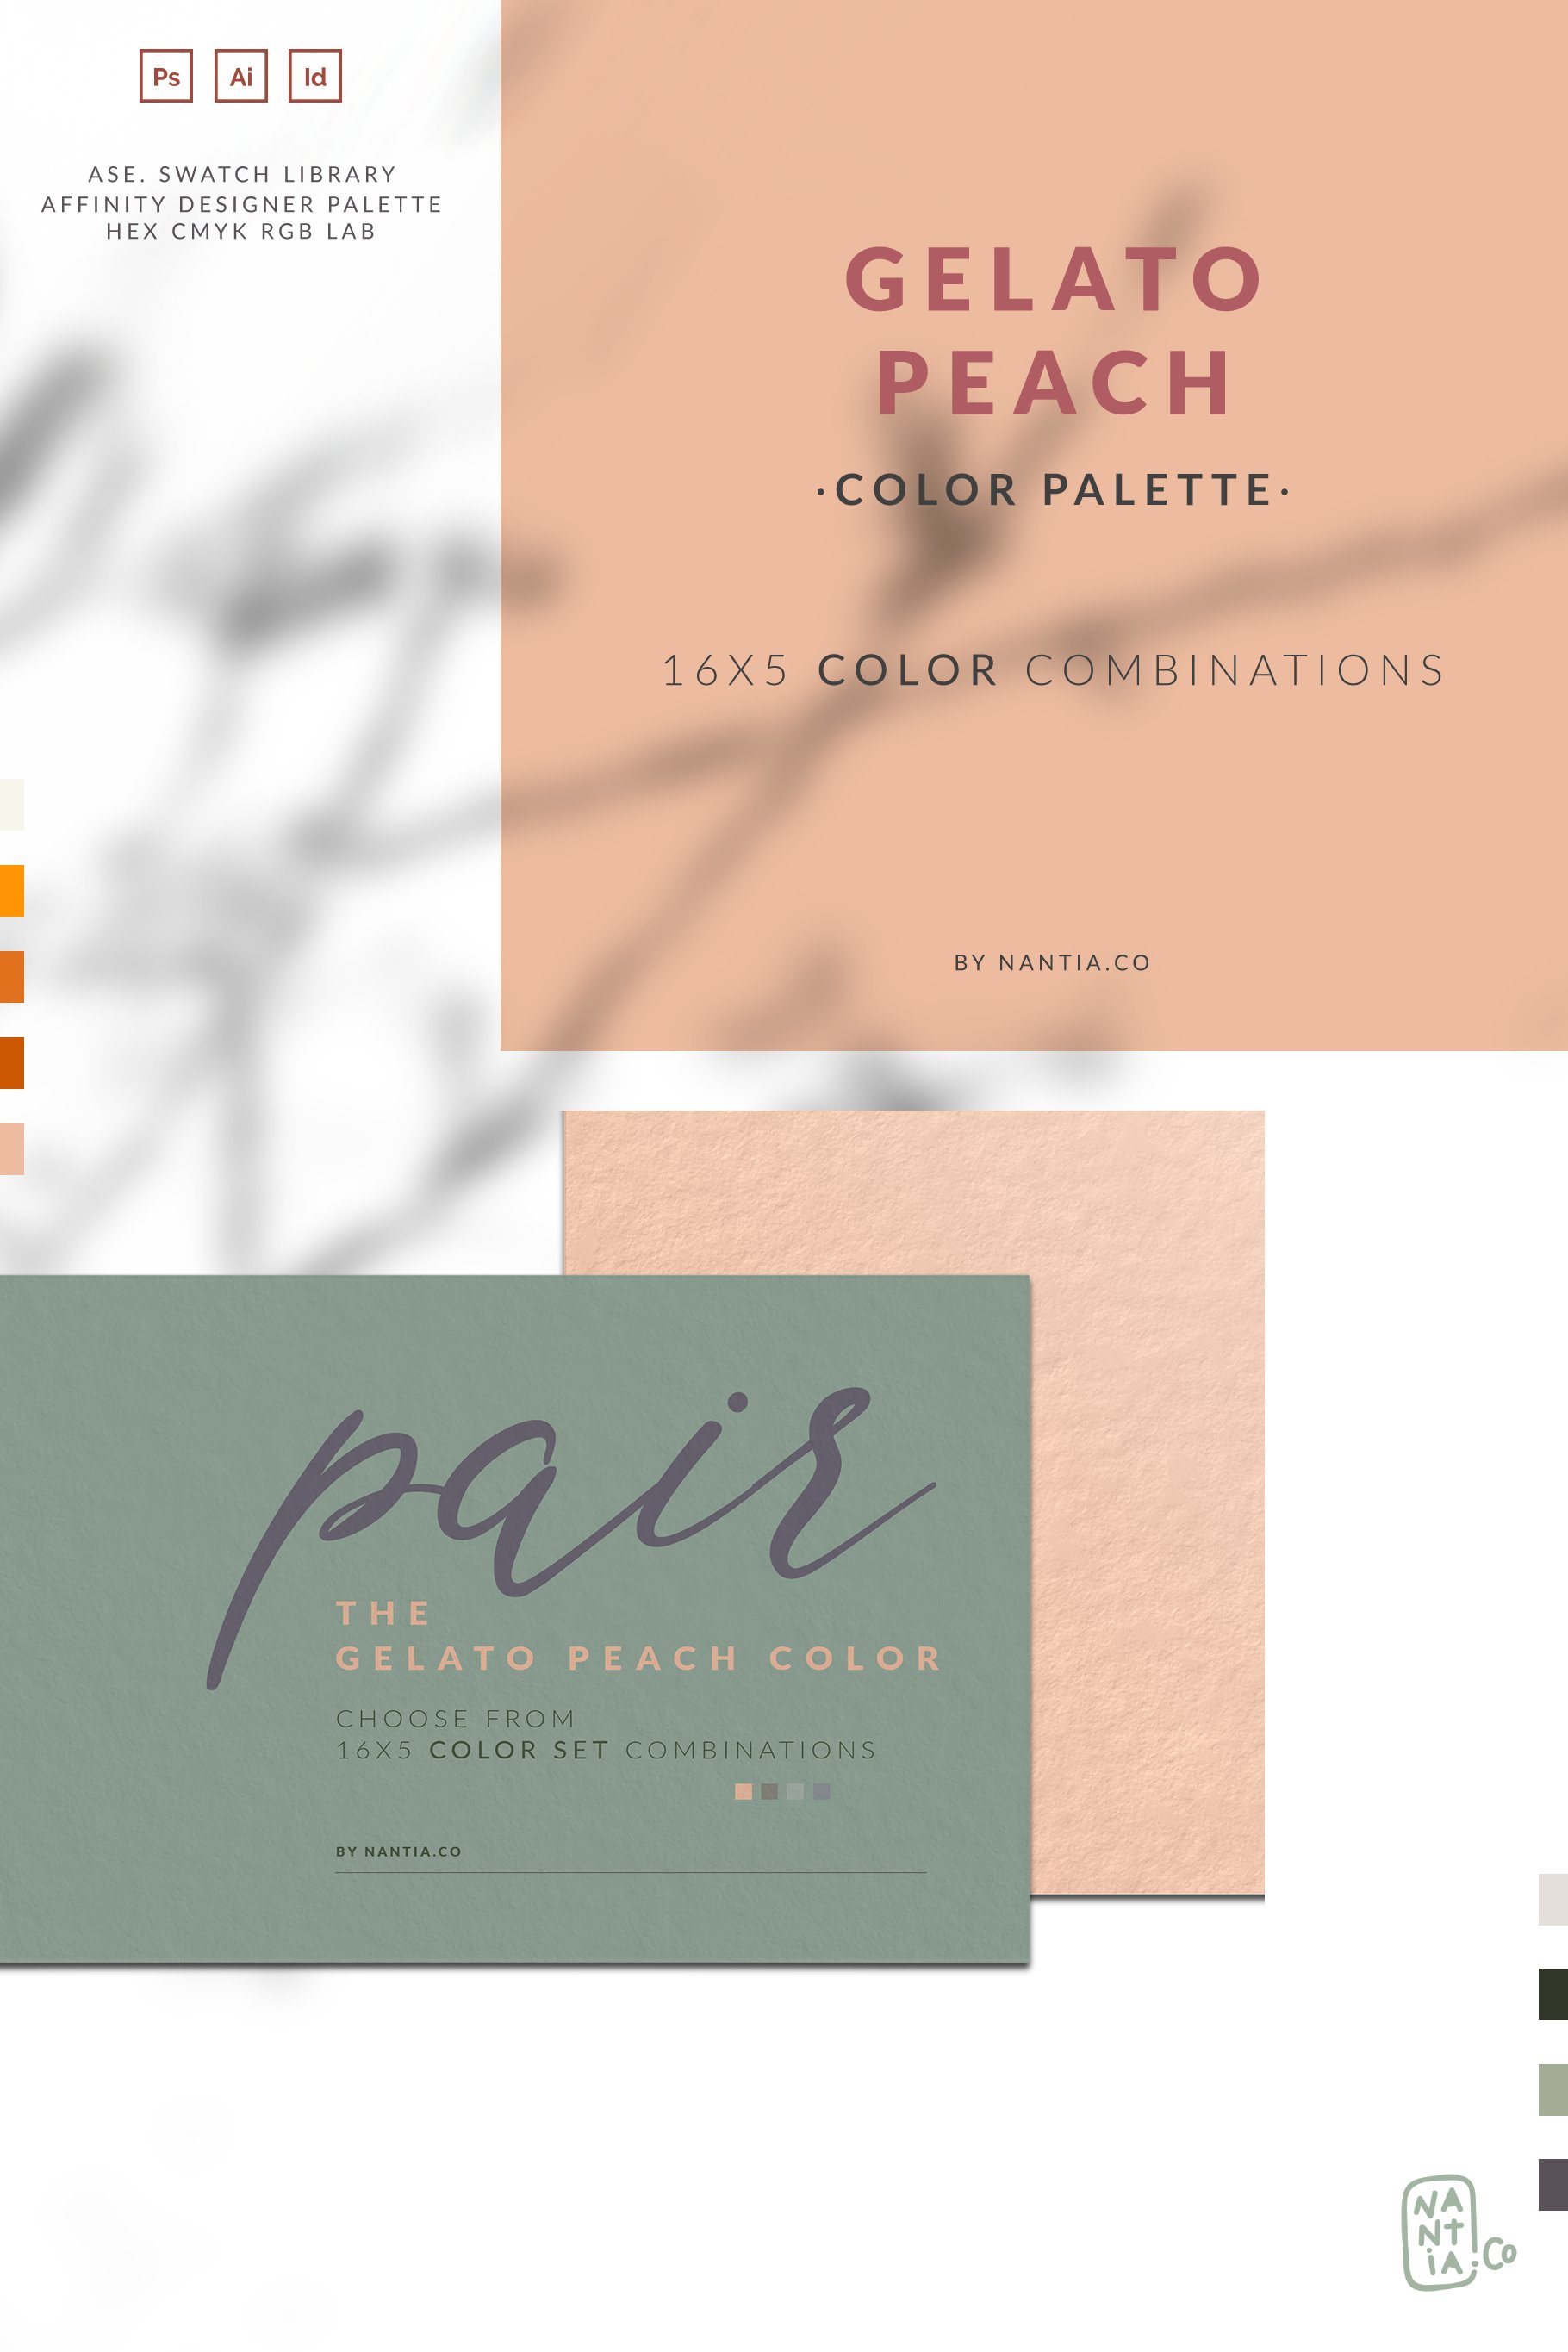 Color Palettes Swatches Peach Gelatocover image.